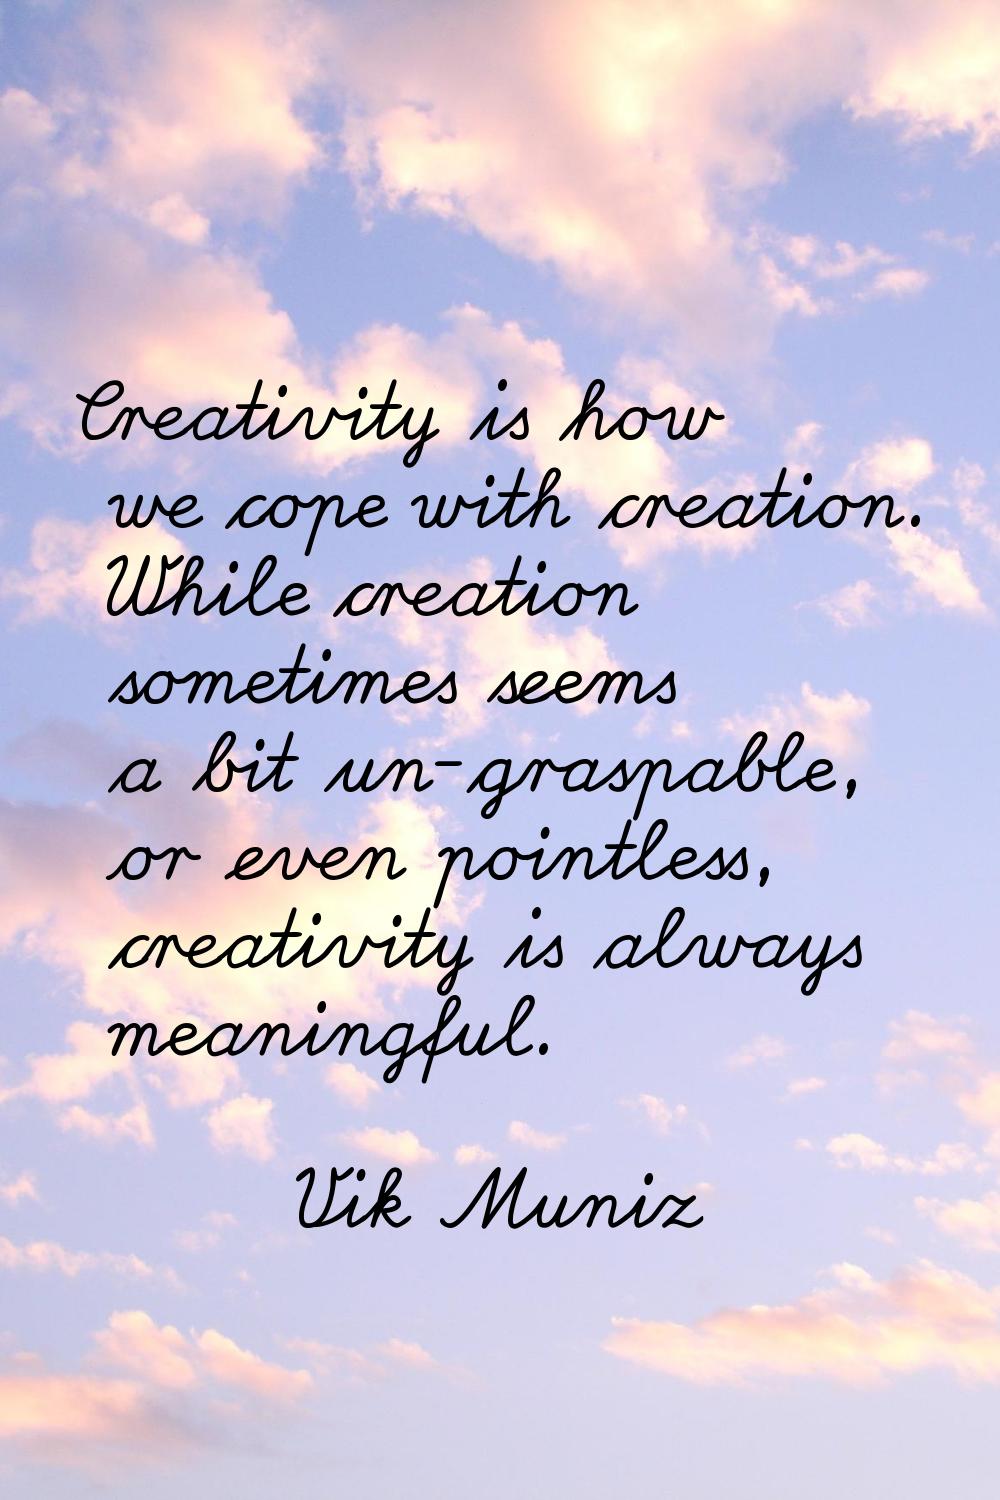 Creativity is how we cope with creation. While creation sometimes seems a bit un-graspable, or even